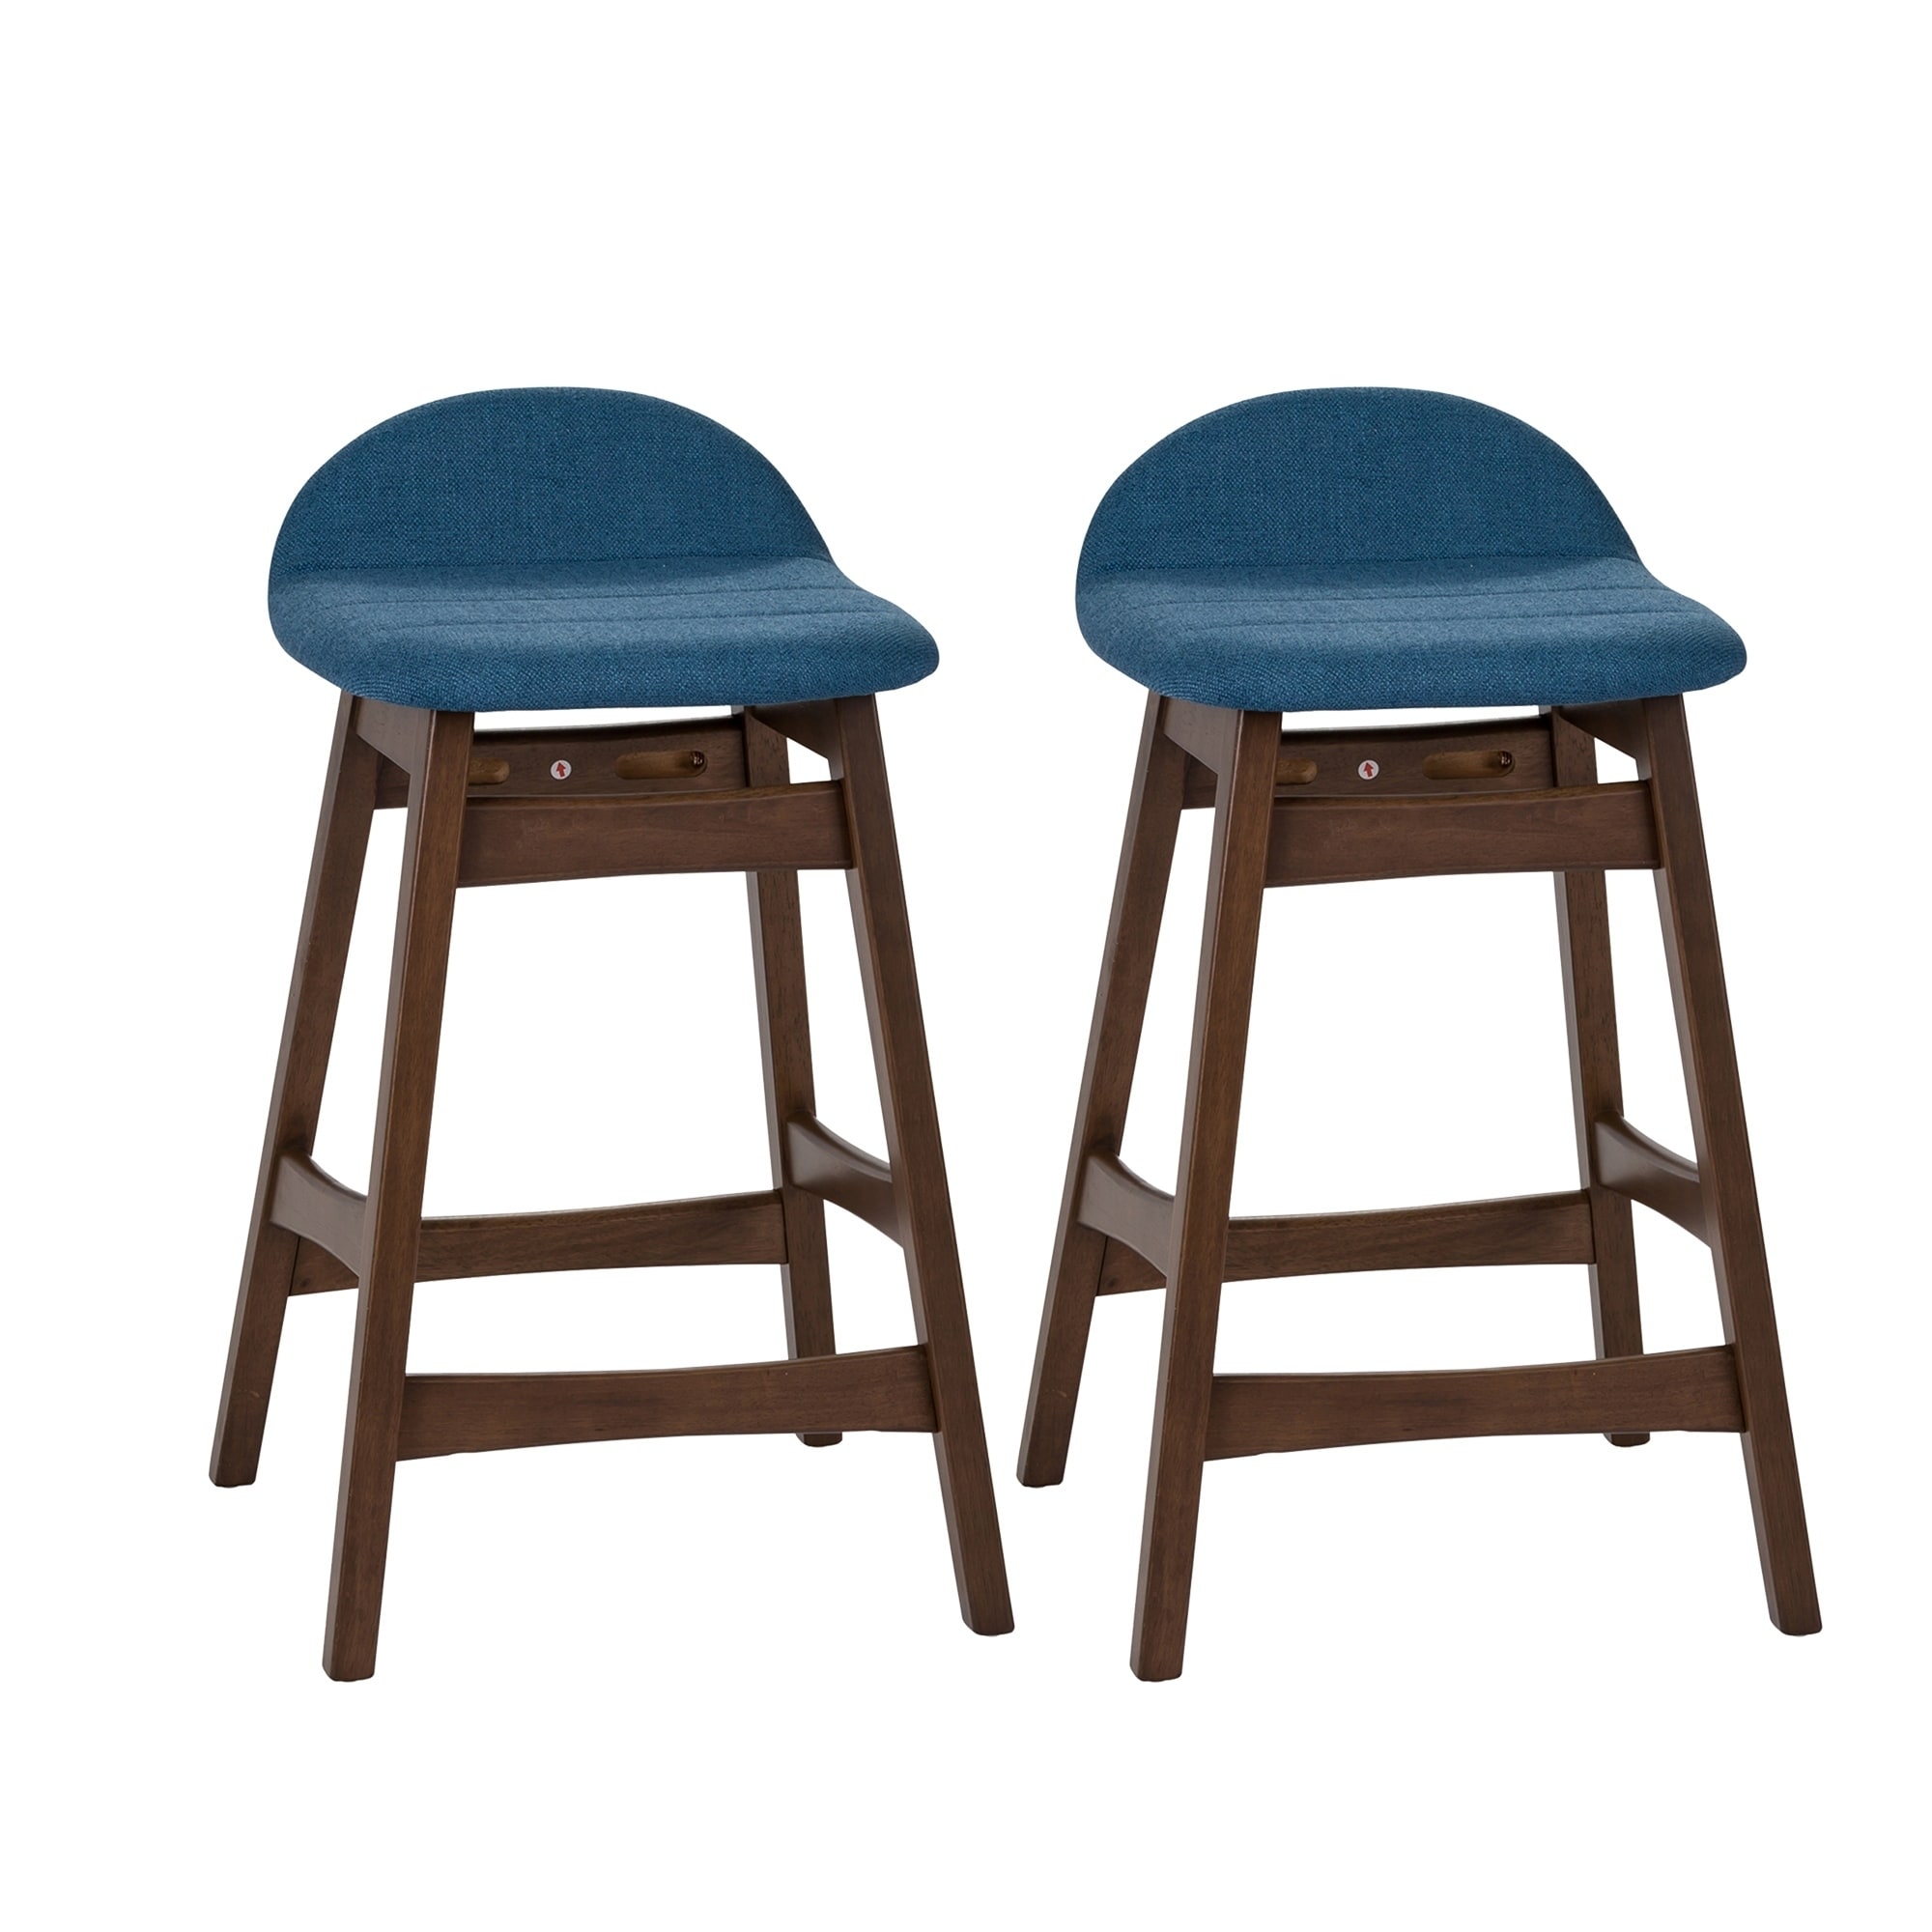 Space Savers Modern Upholstered 24 Inch Counter Height Barstool Set Of 2 D09fdb1e 4089 4976 82e0 392ea1eb3190 